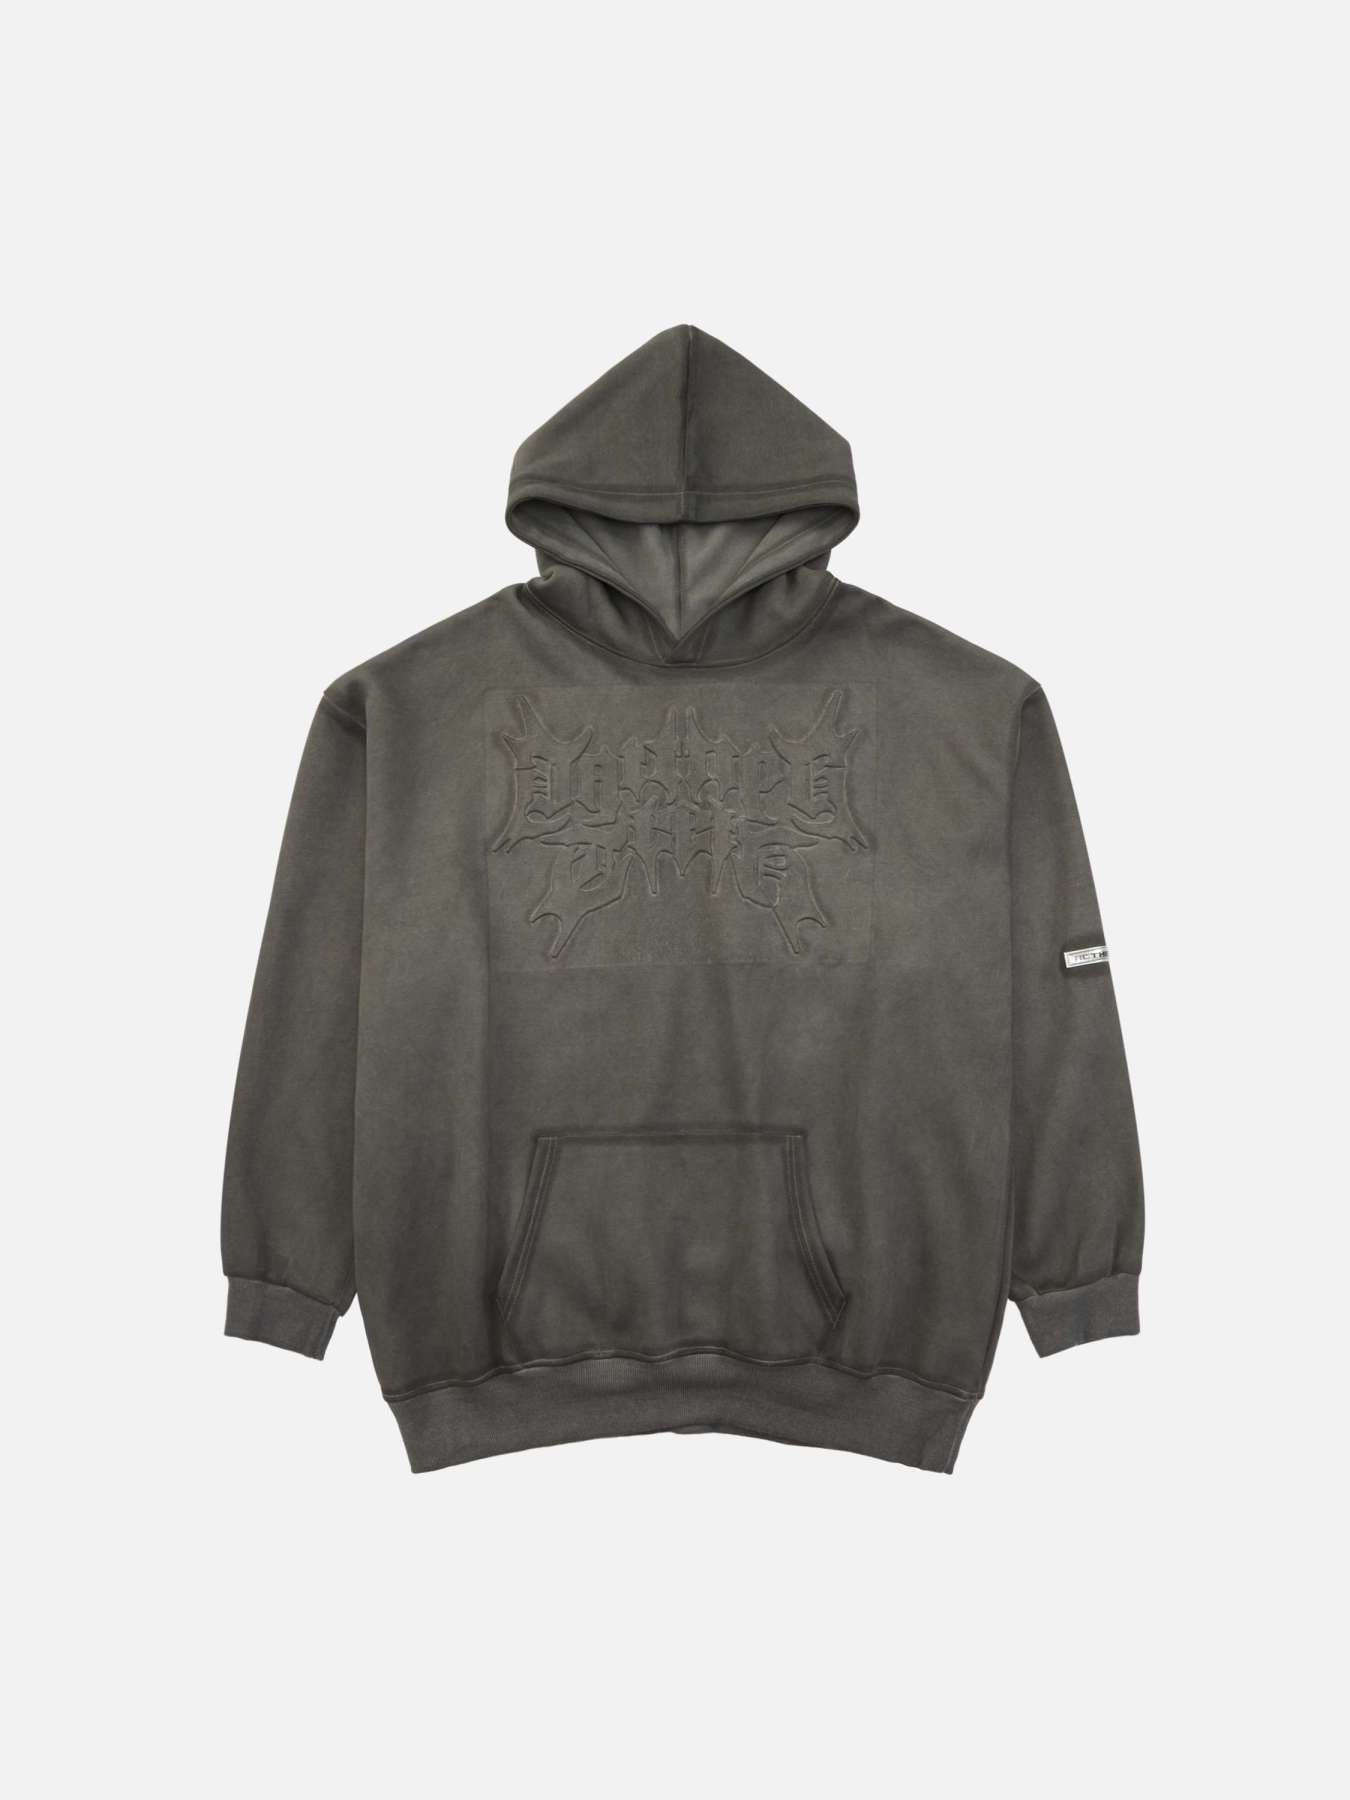 Stenciled Letters Washed Hoodie - 1998